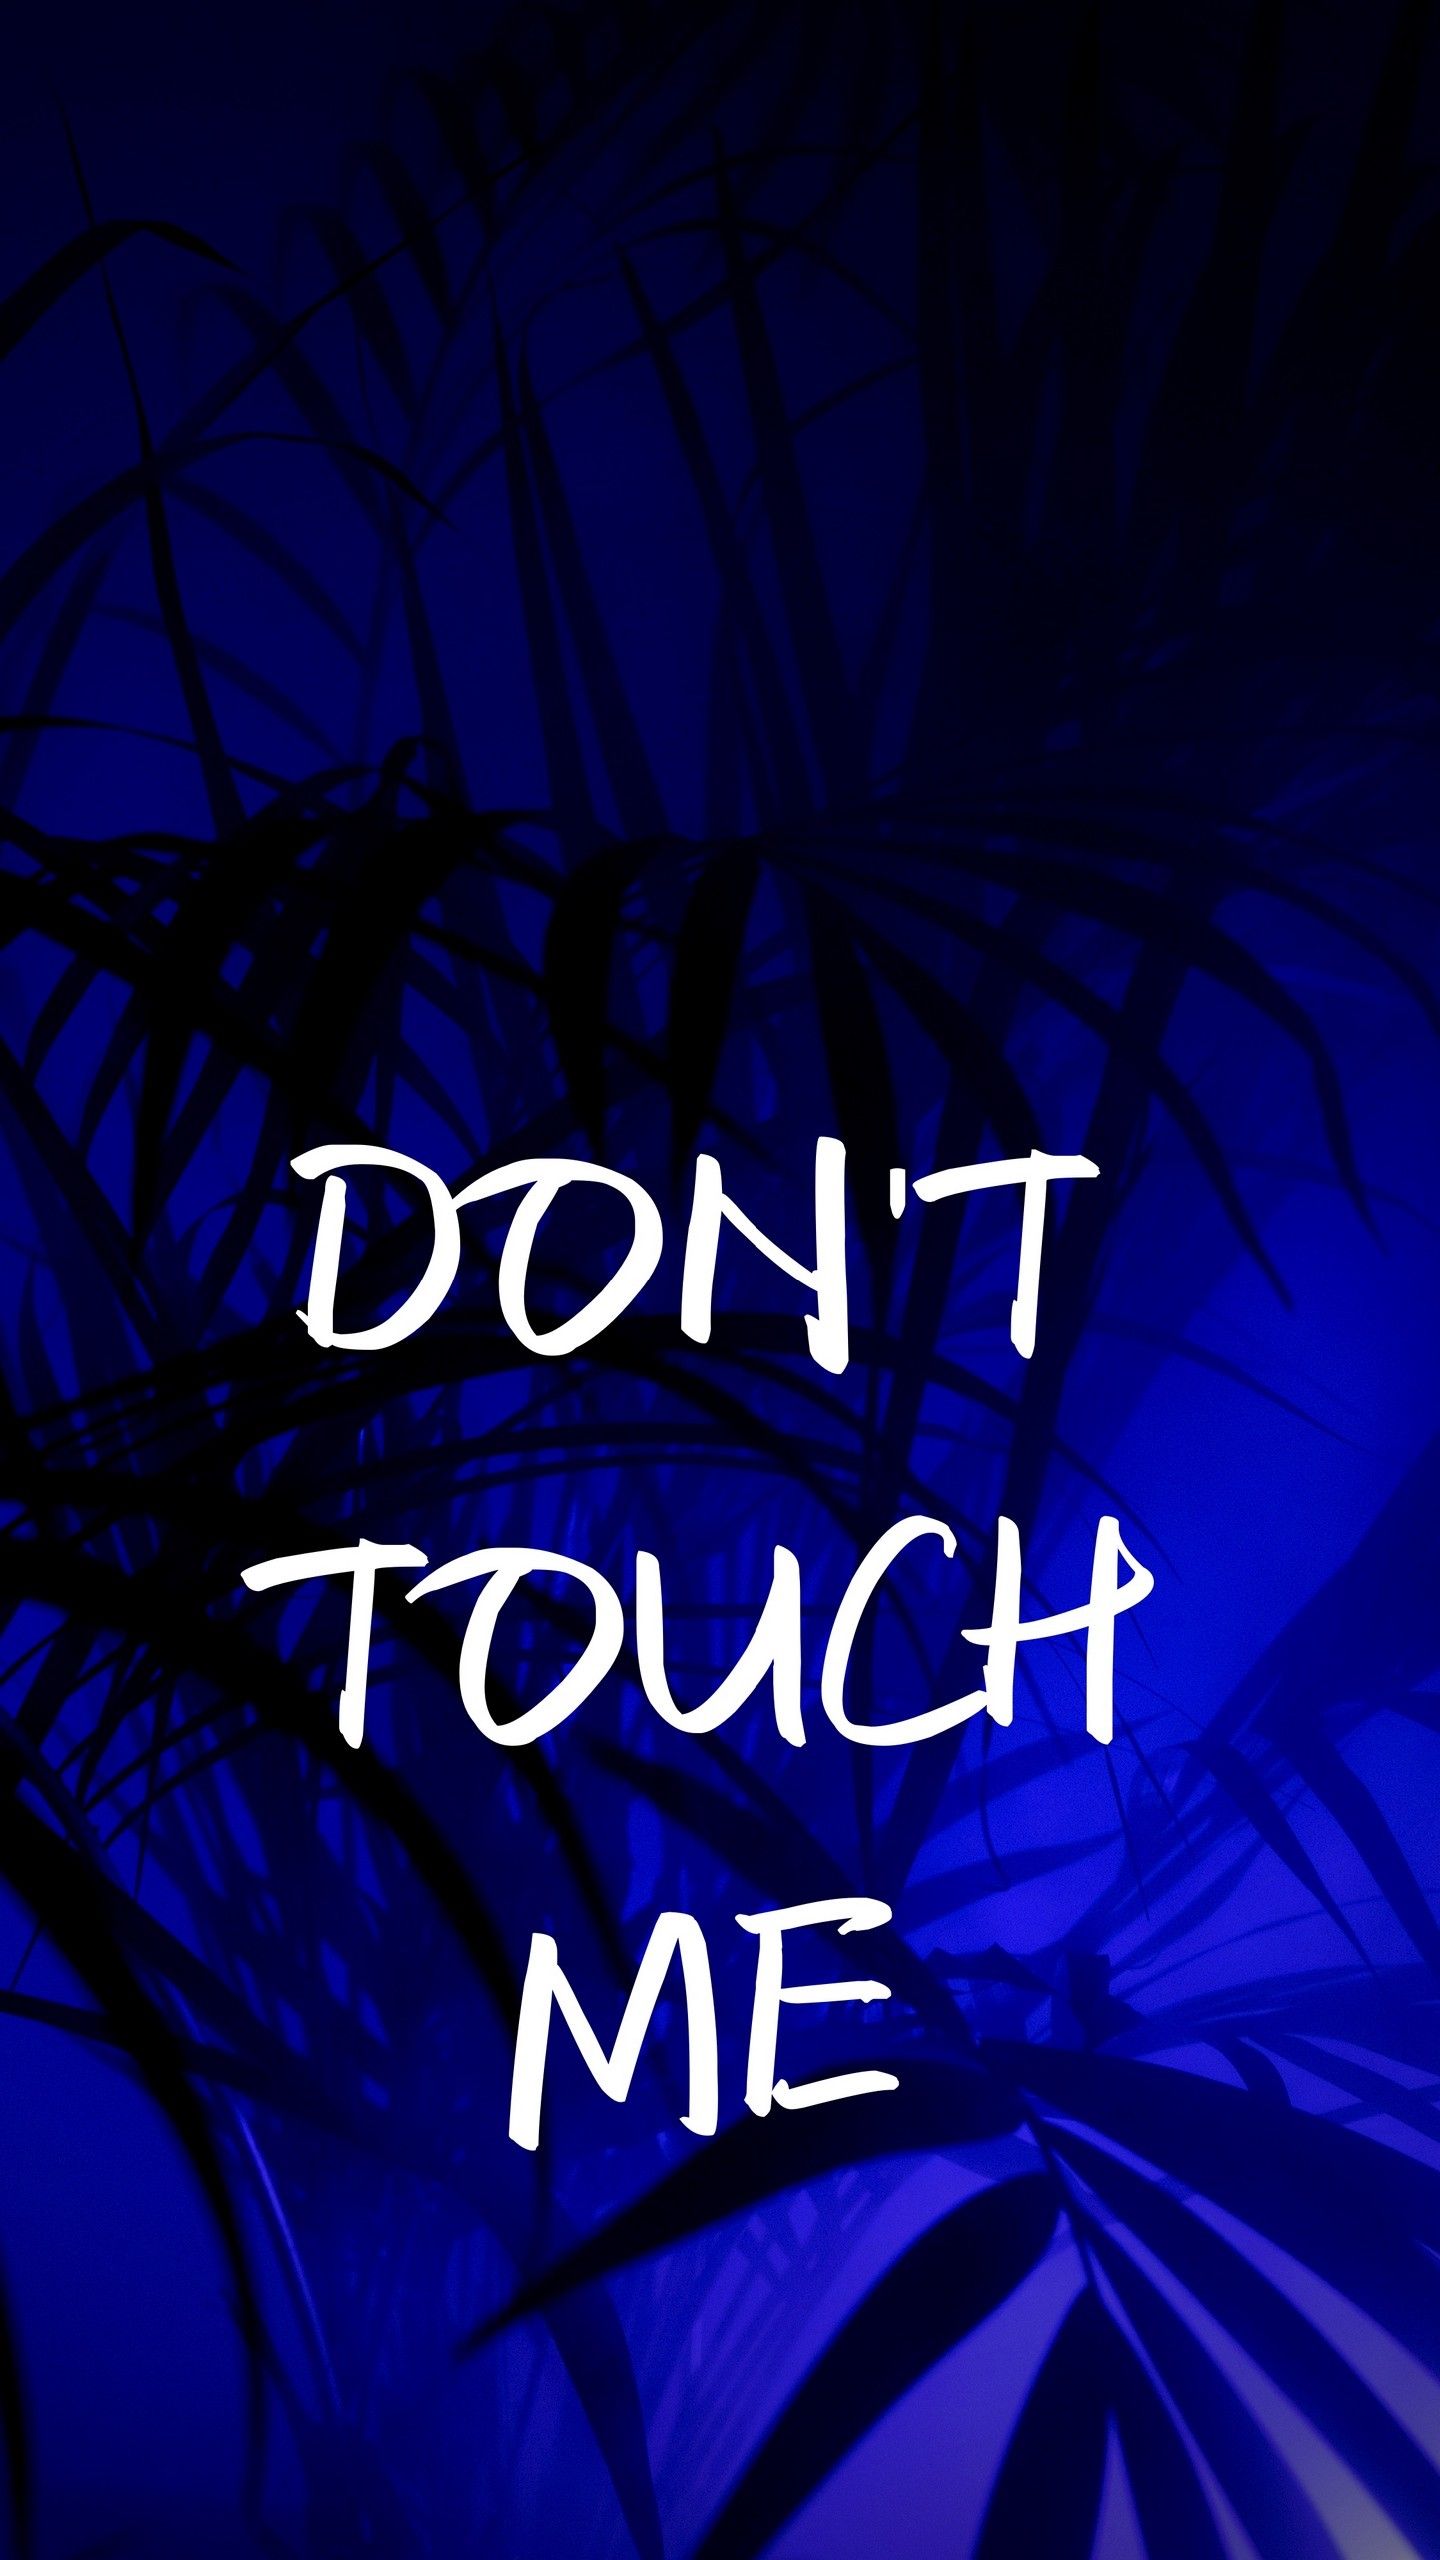 Dont touch my phone Wallpaper for mobile phone, tablet, desktop computer and other devices HD and 4K wall. Dont touch my phone wallpaper, Dont touch me, Touch me